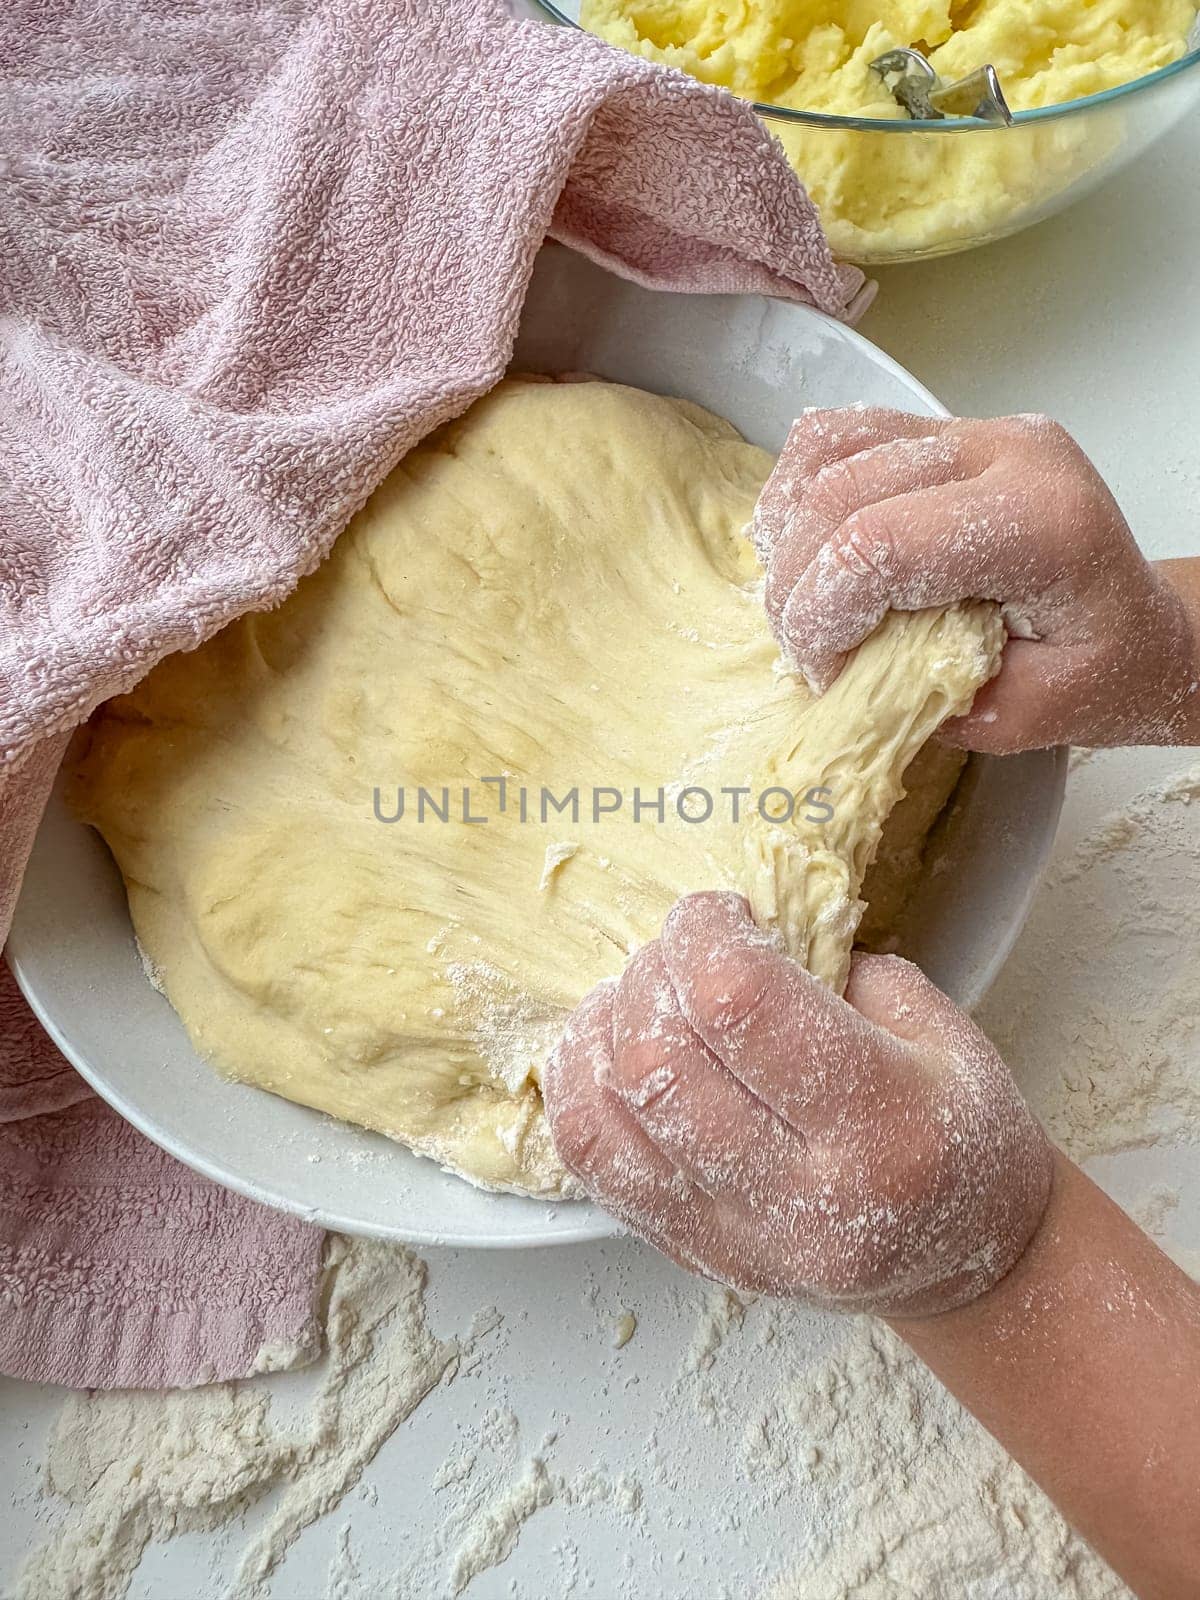 The hands of child knead the dough for making pies on white table, top view. High quality photo